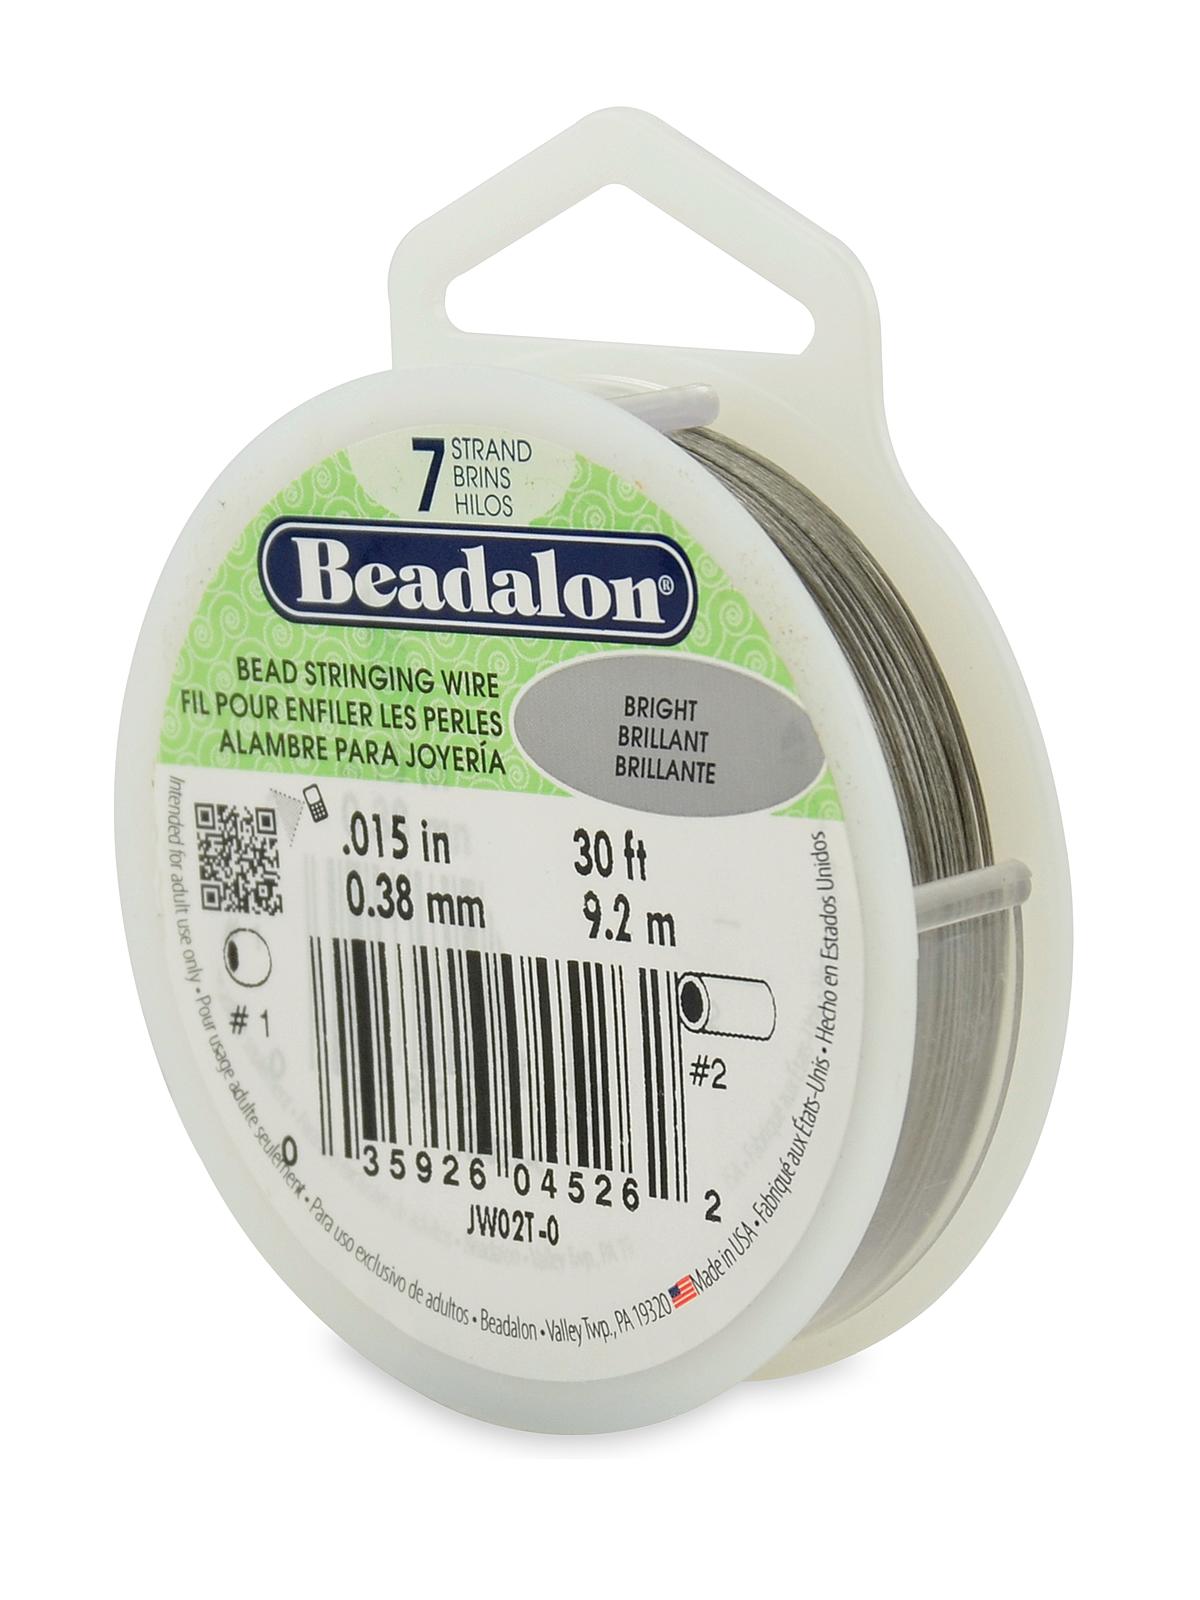 7 Strand Bead Stringing Wire Bright .015 In. (0.38 Mm) 30 Ft. Spool